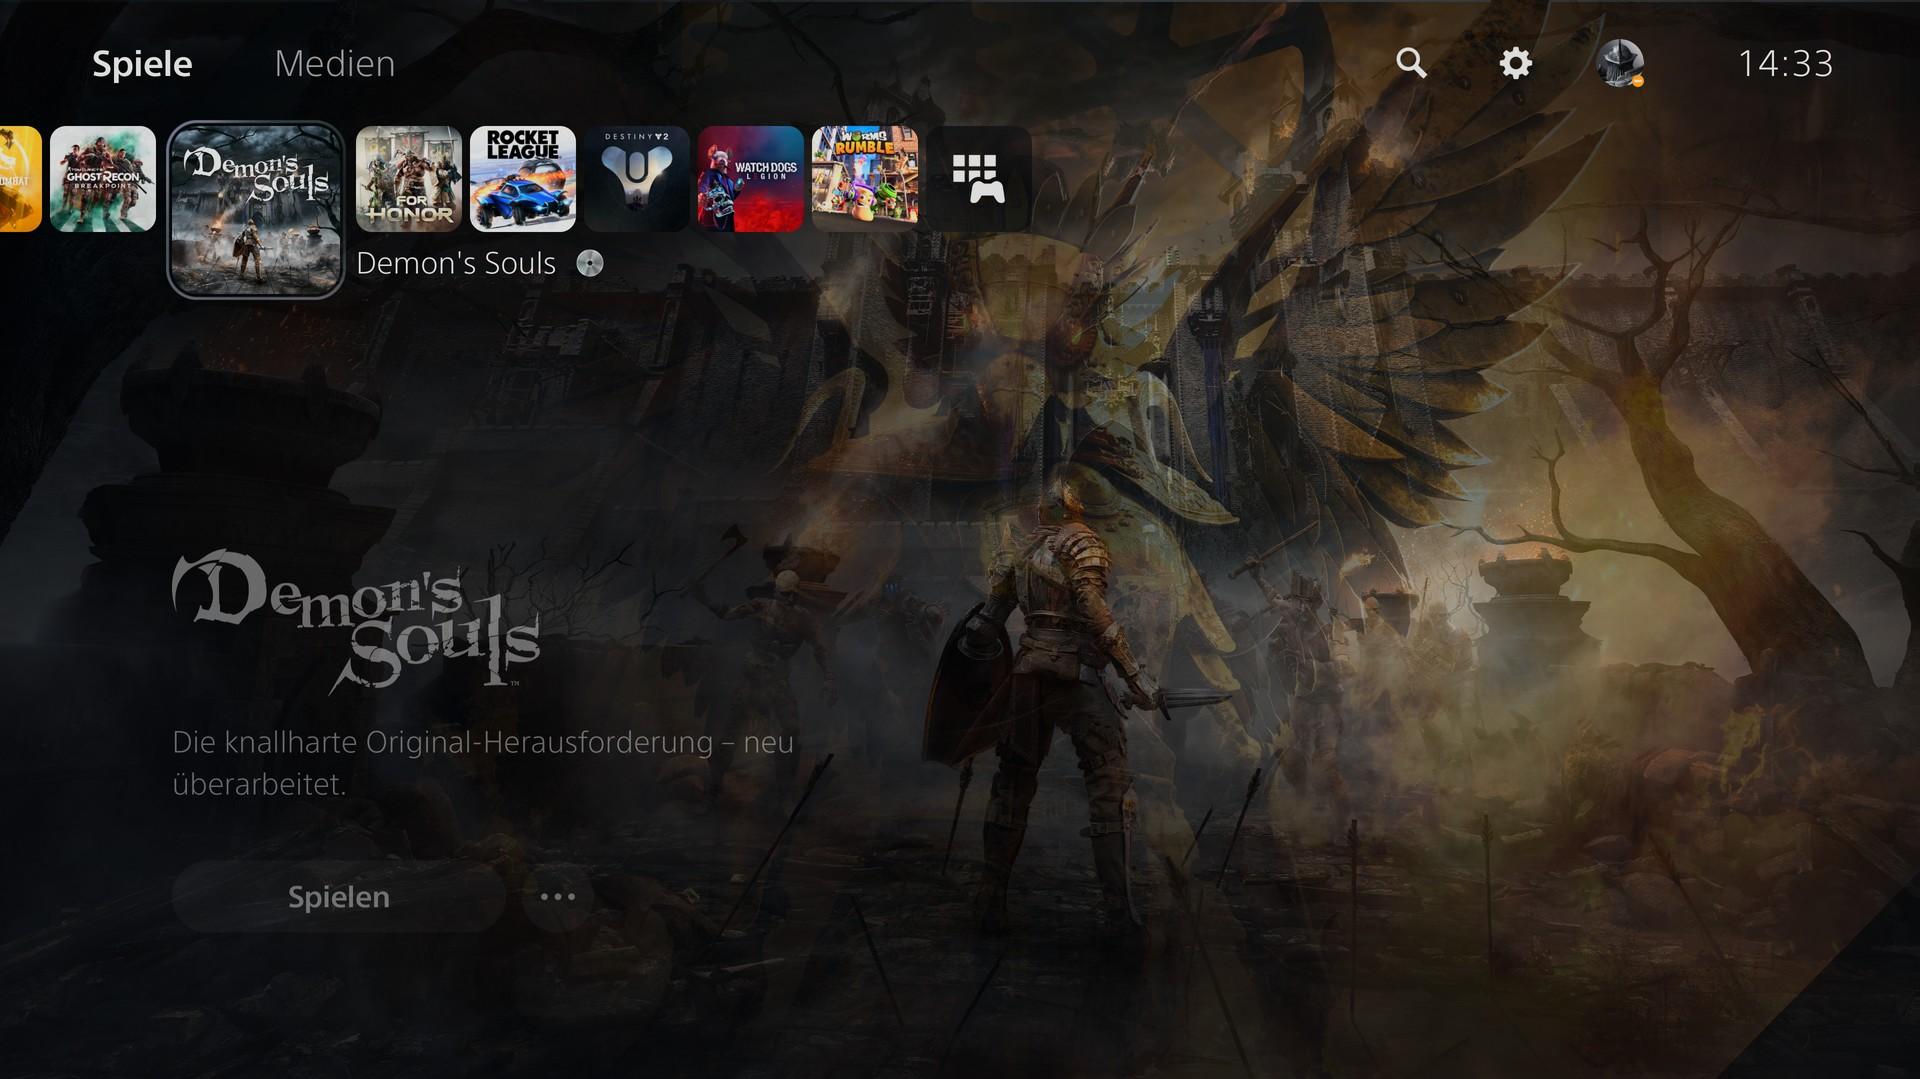 I tried to screenshot the for honor wallpaper on PS5 when